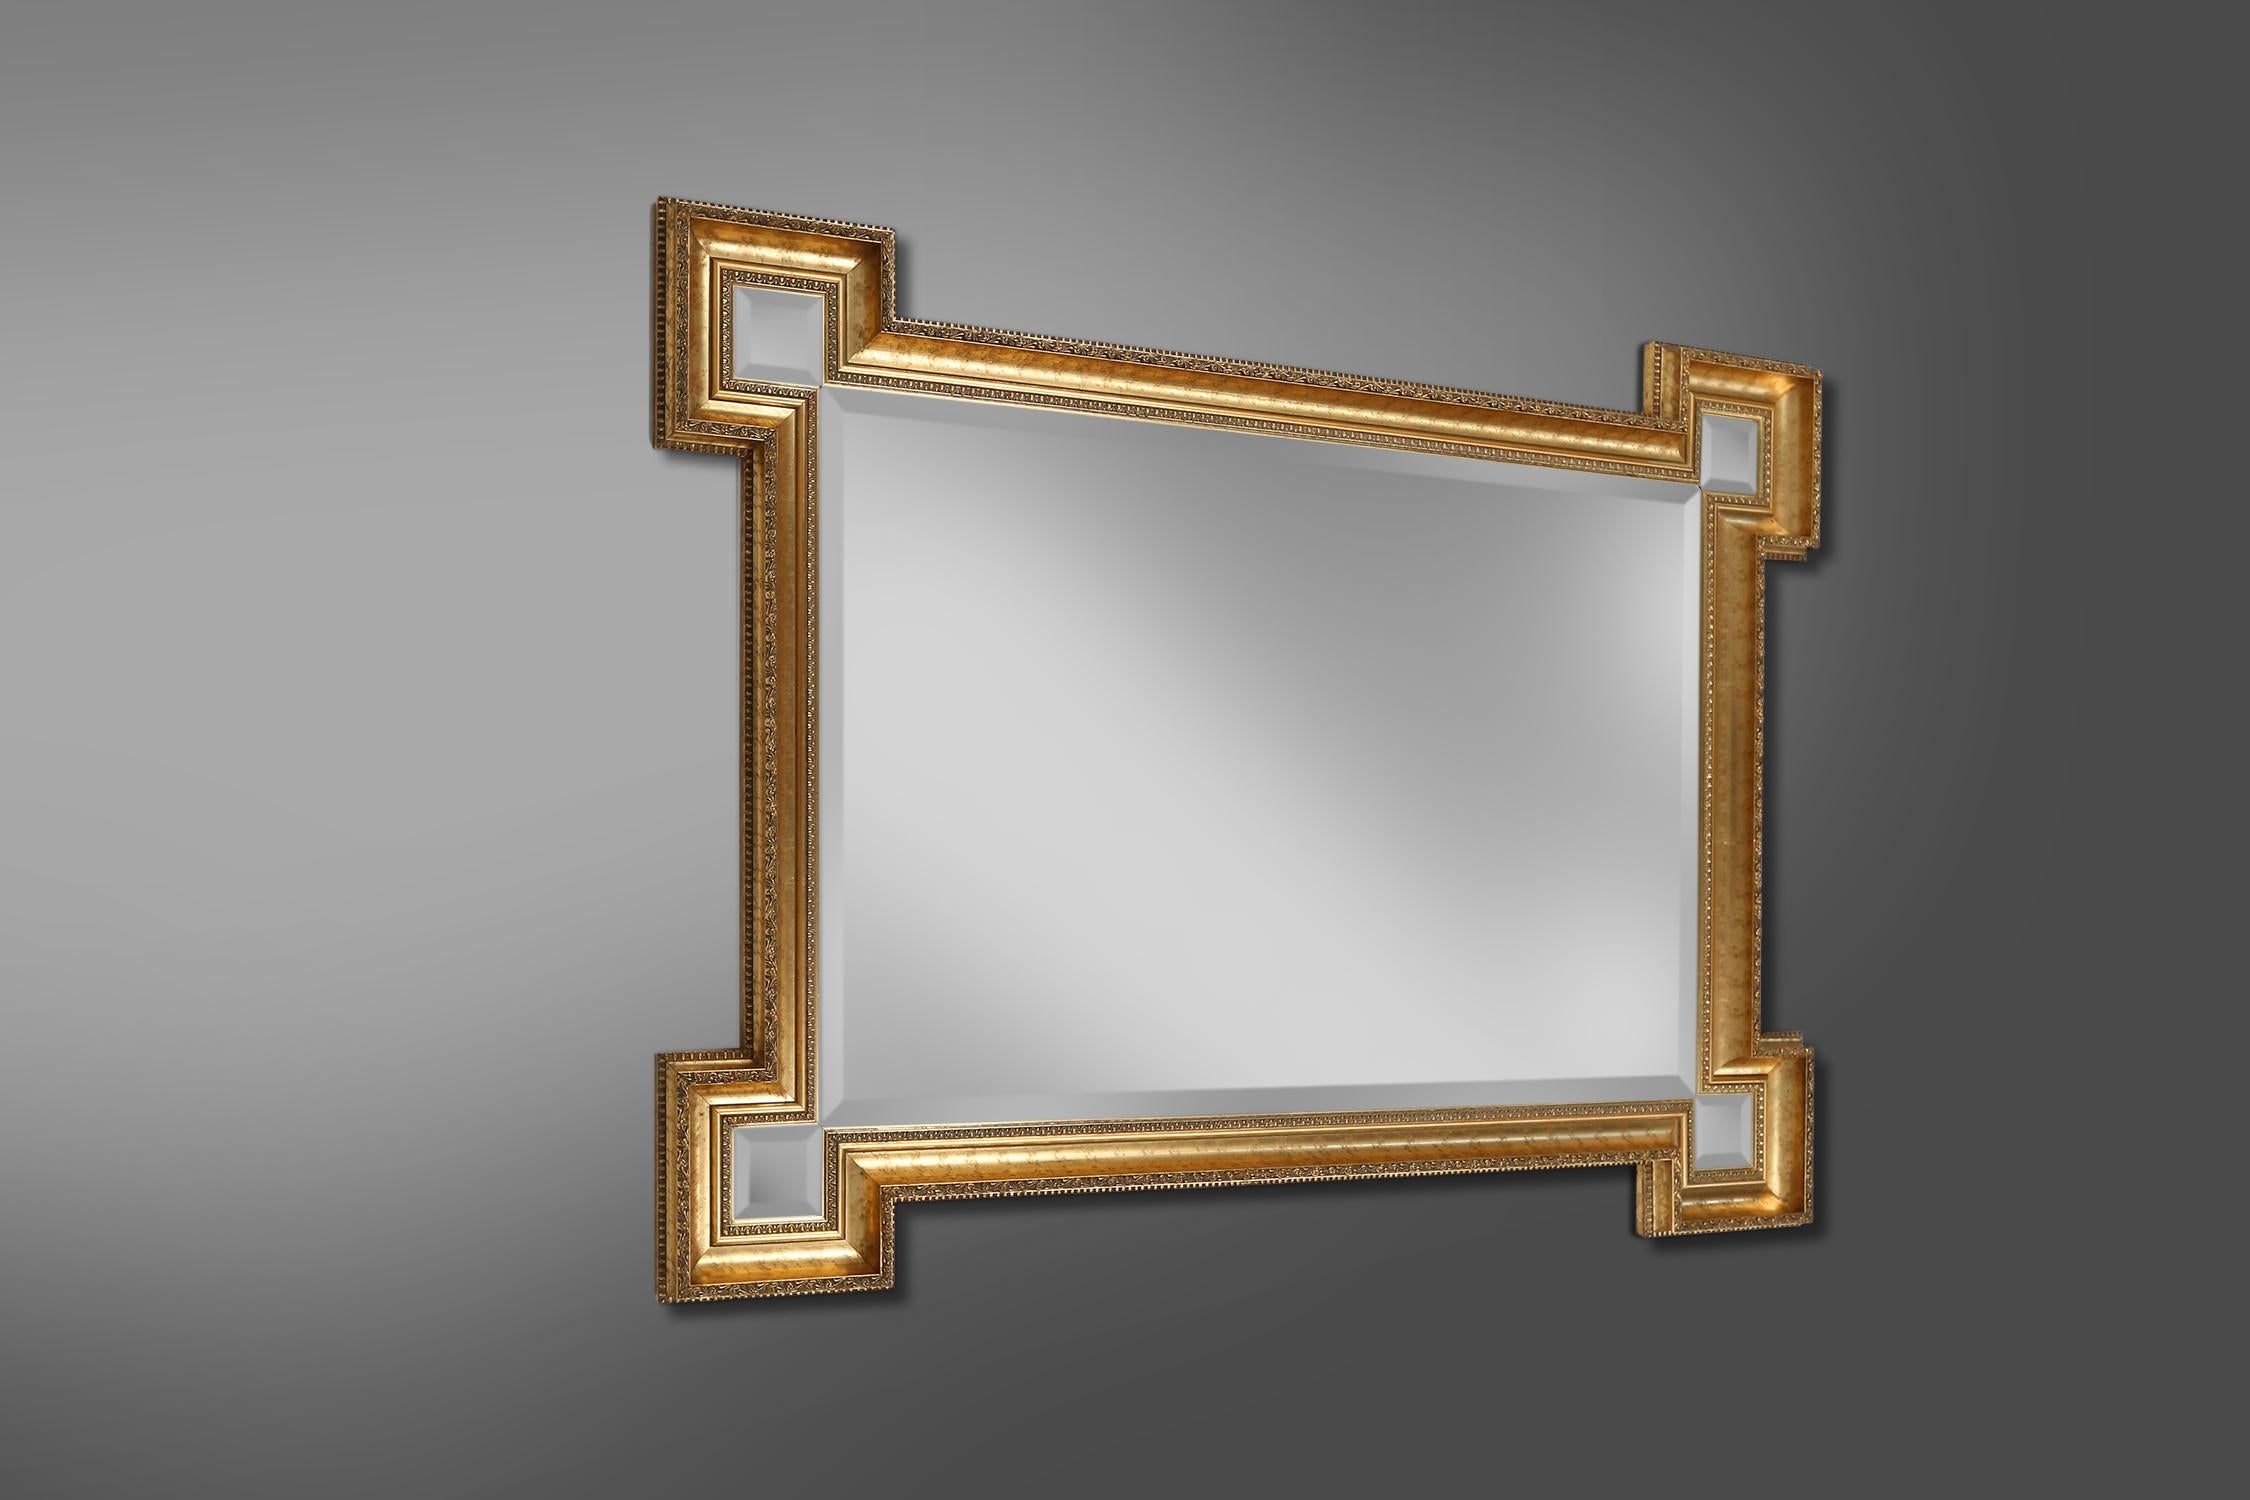 Belgium / 1950s / gold mirror / resin / mid-century / vintage

A stunning golden mirror from the fifties with stylish geometric form and elegant decorated frame. This exquisite mirror is a true masterpiece that will elevate the ambiance of any